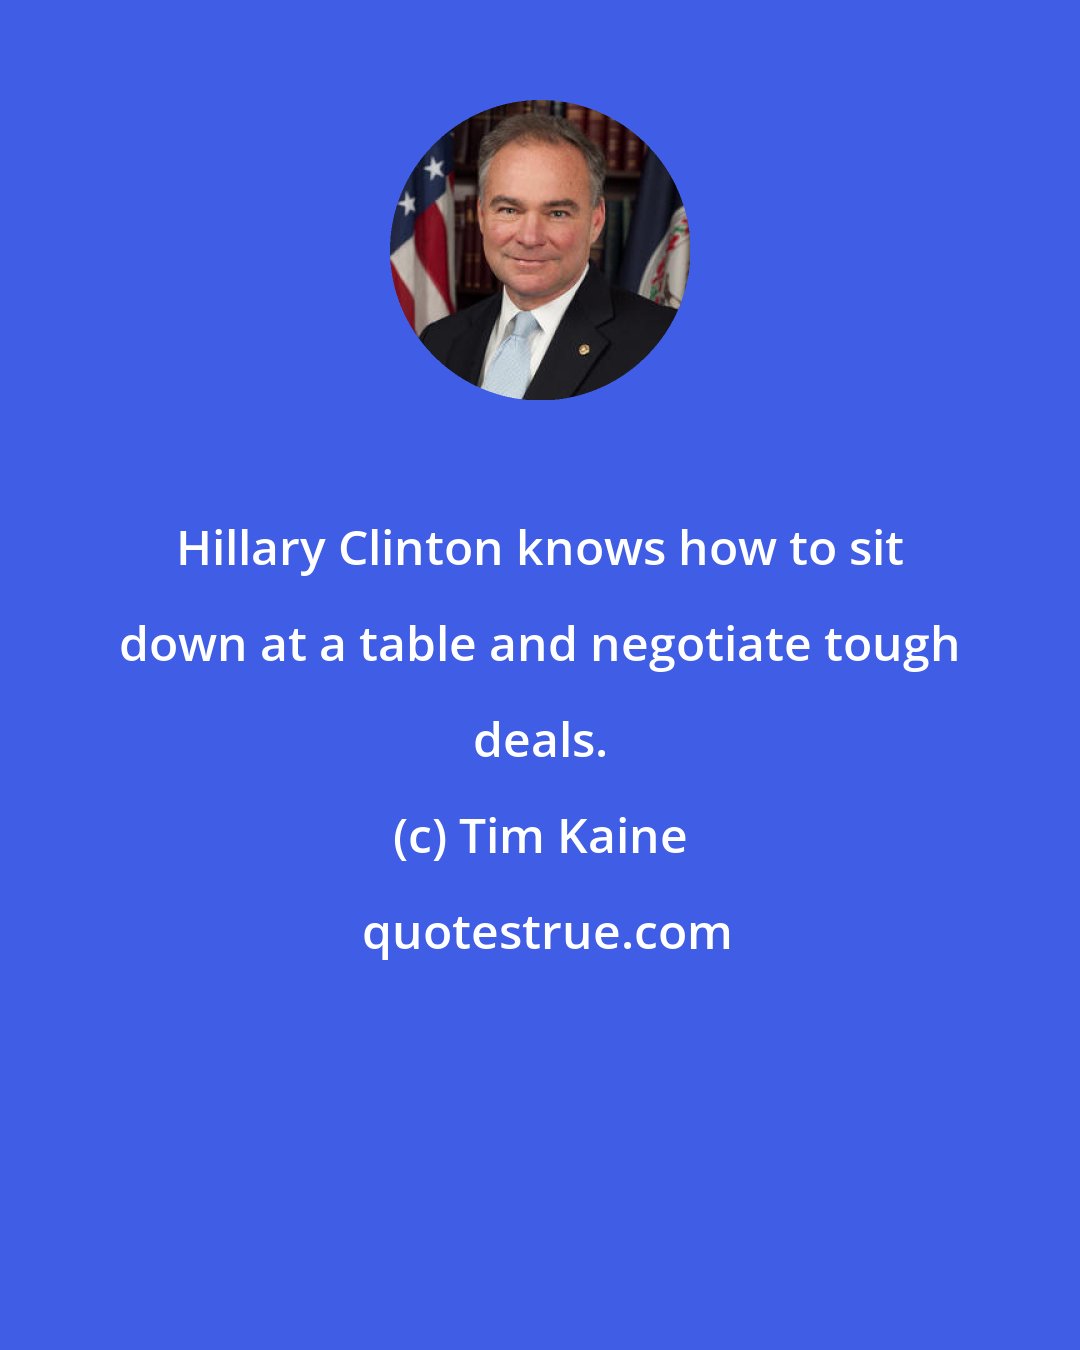 Tim Kaine: Hillary Clinton knows how to sit down at a table and negotiate tough deals.